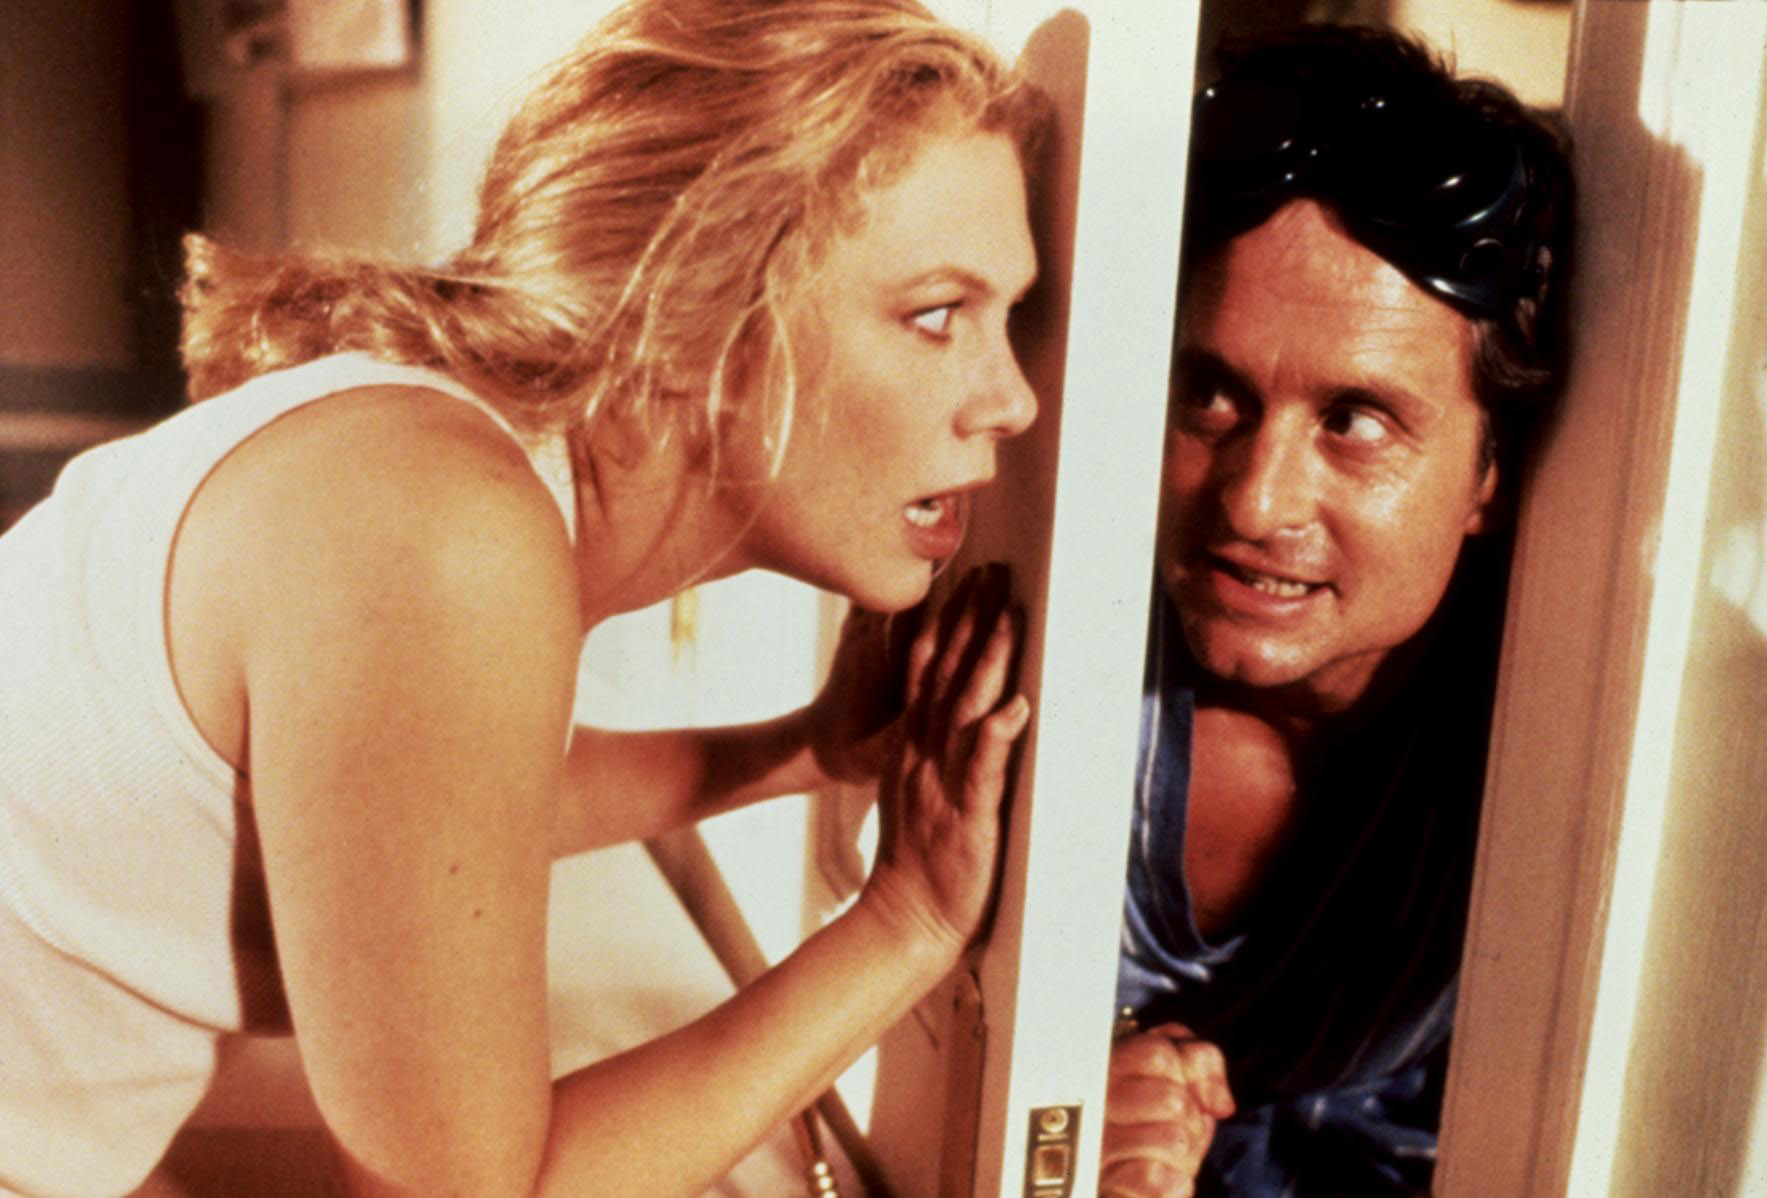 Kathleen Turner and Michael Douglas pushing a door at each other.